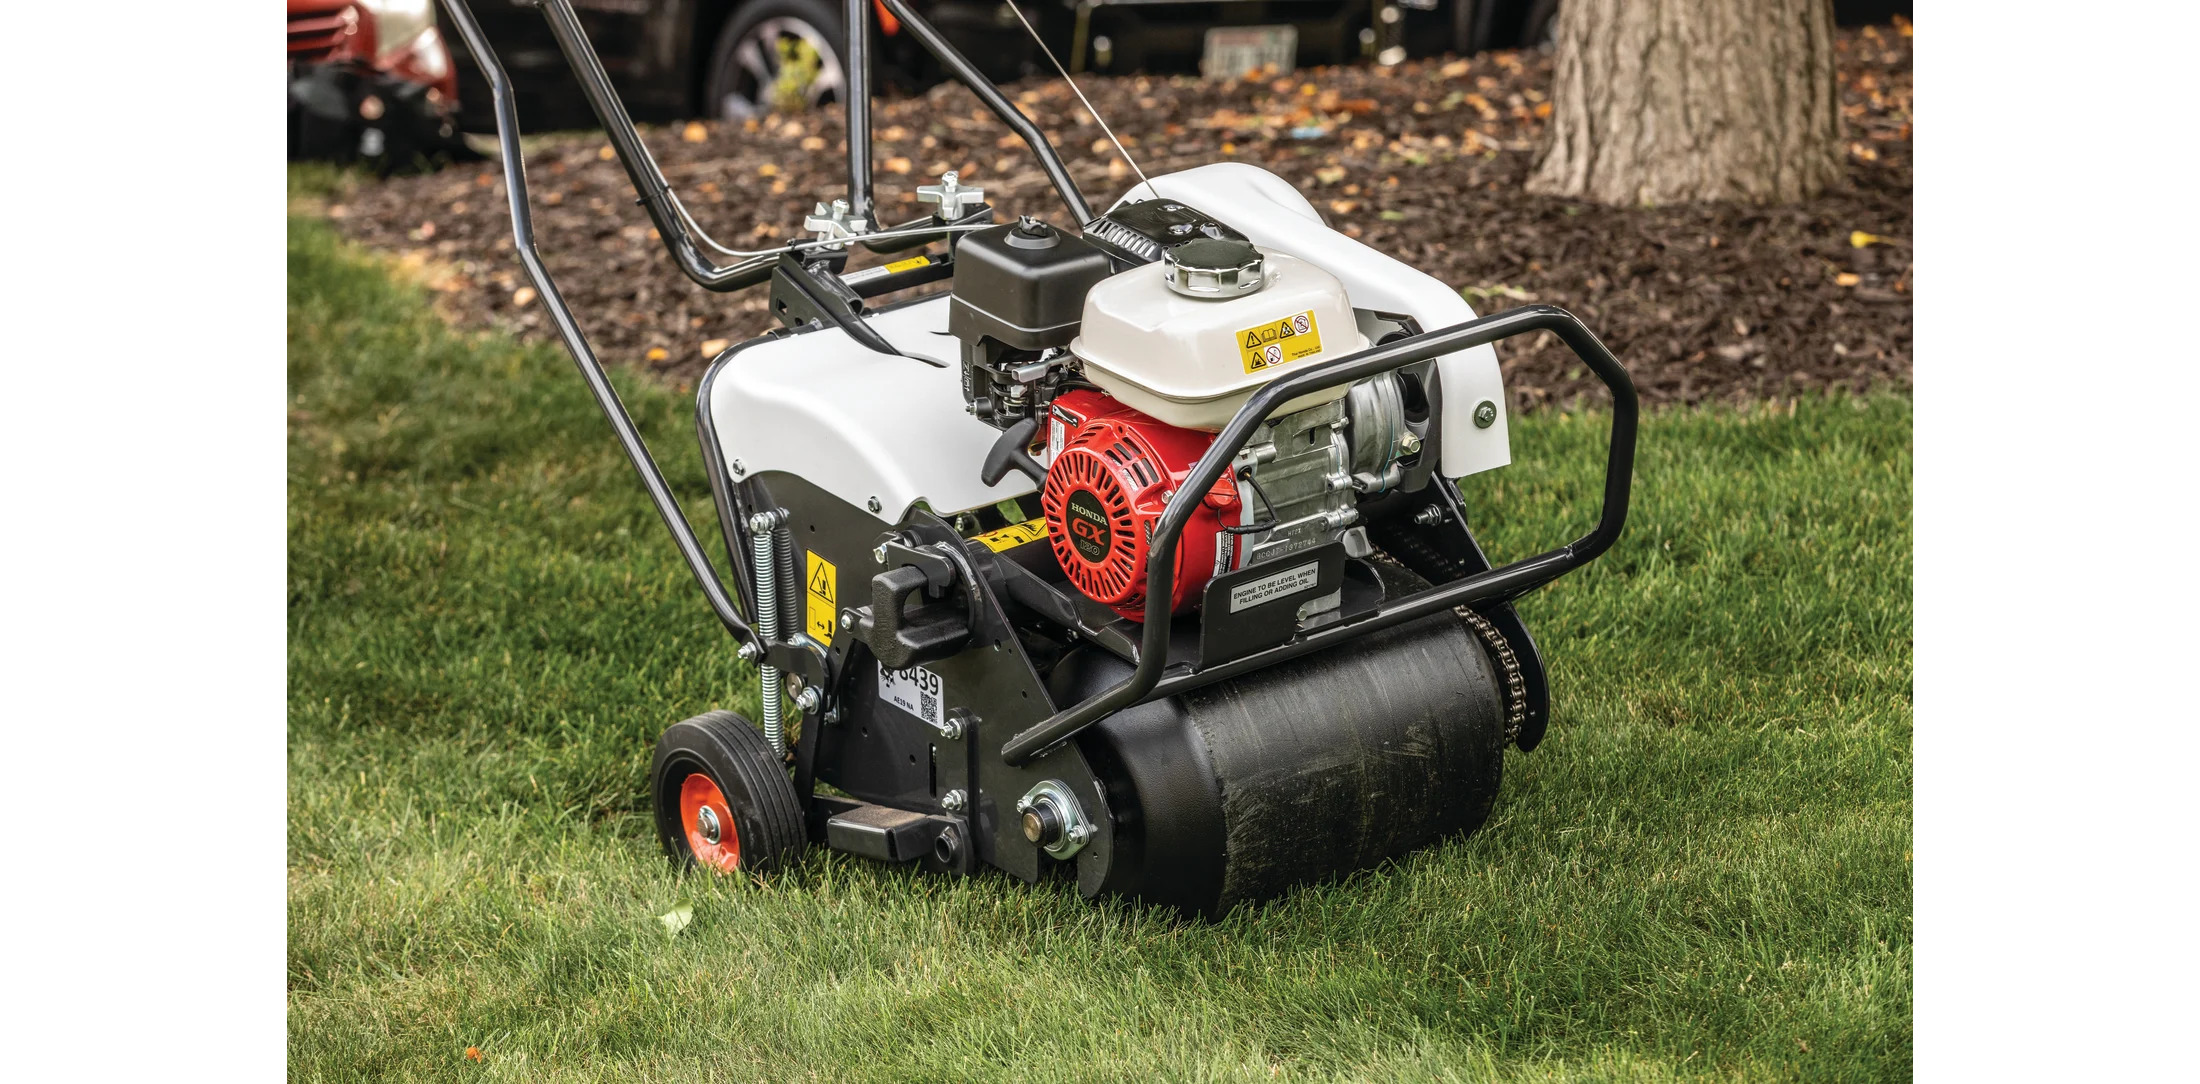 Browse Specs and more for the Bobcat AE19 Walk-Behind Aerator - Bobcat of Indy